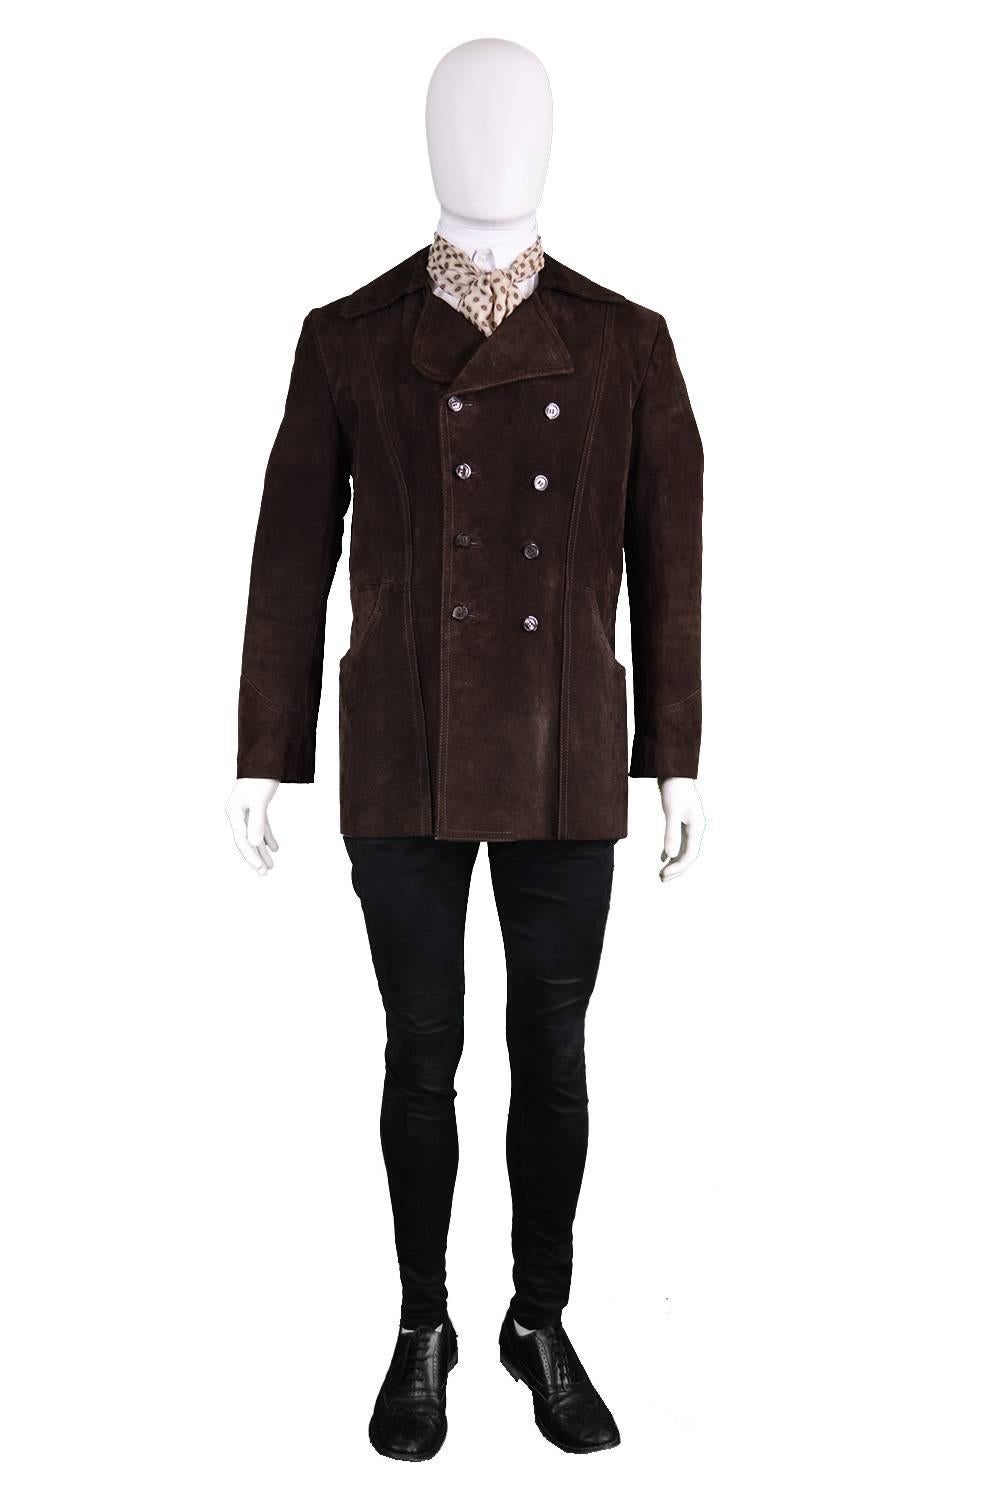 An absolutely rare and incredible vintage men's suede coat from the 1960s by legendary Carnaby Street label, Lord John. In a dark brown suede with double breasted fastenings, rounded lapels and a tailored waist - such a perfect, original dandy